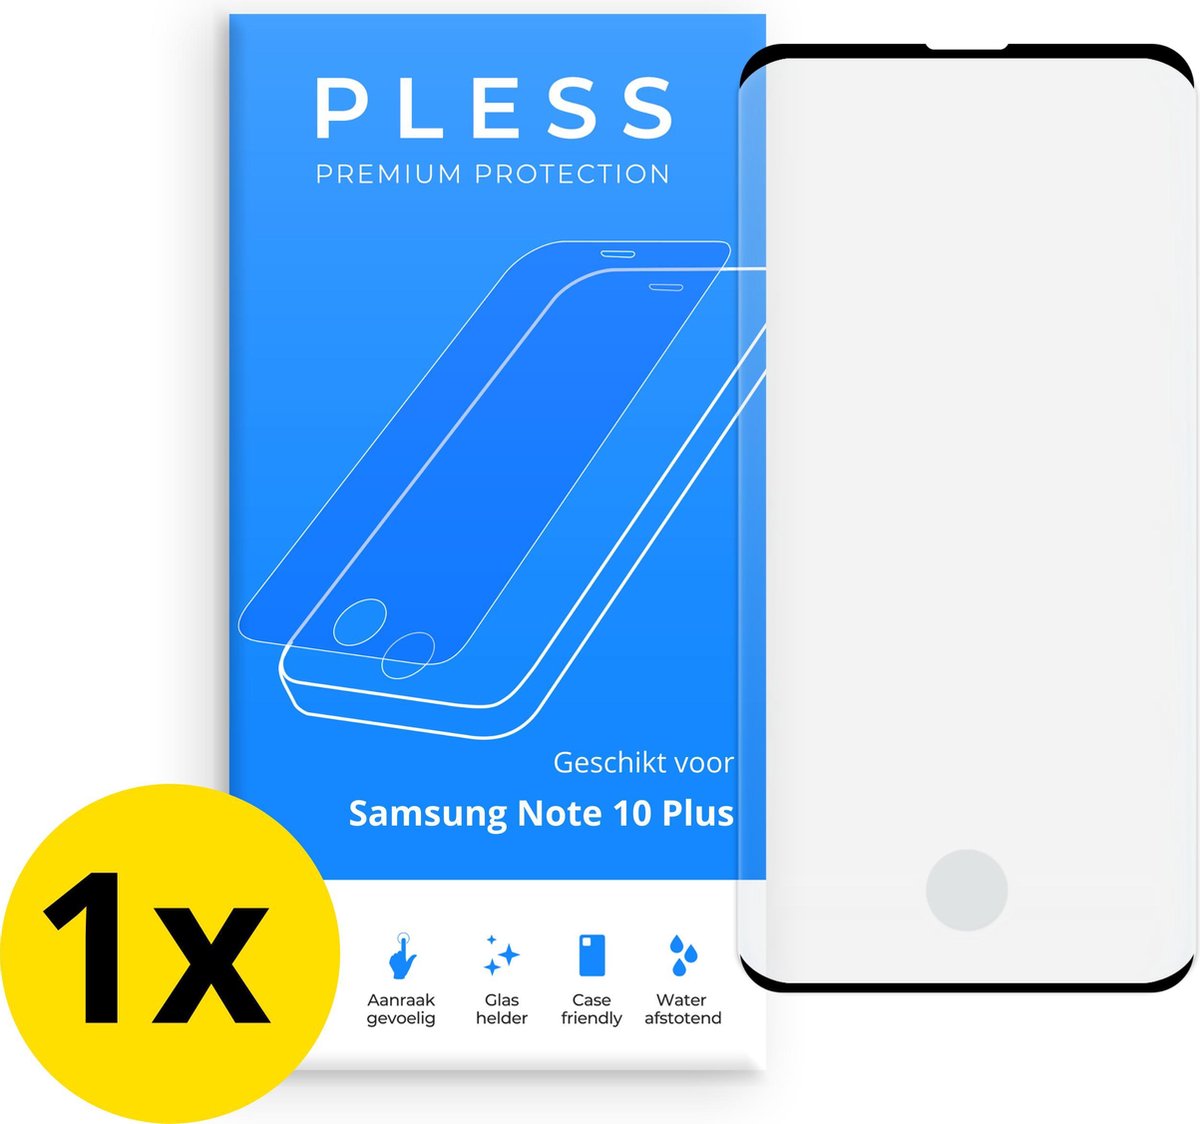 Samsung Note 10 Plus Screenprotector 1x - Beschermglas Tempered Glass Cover - Pless®